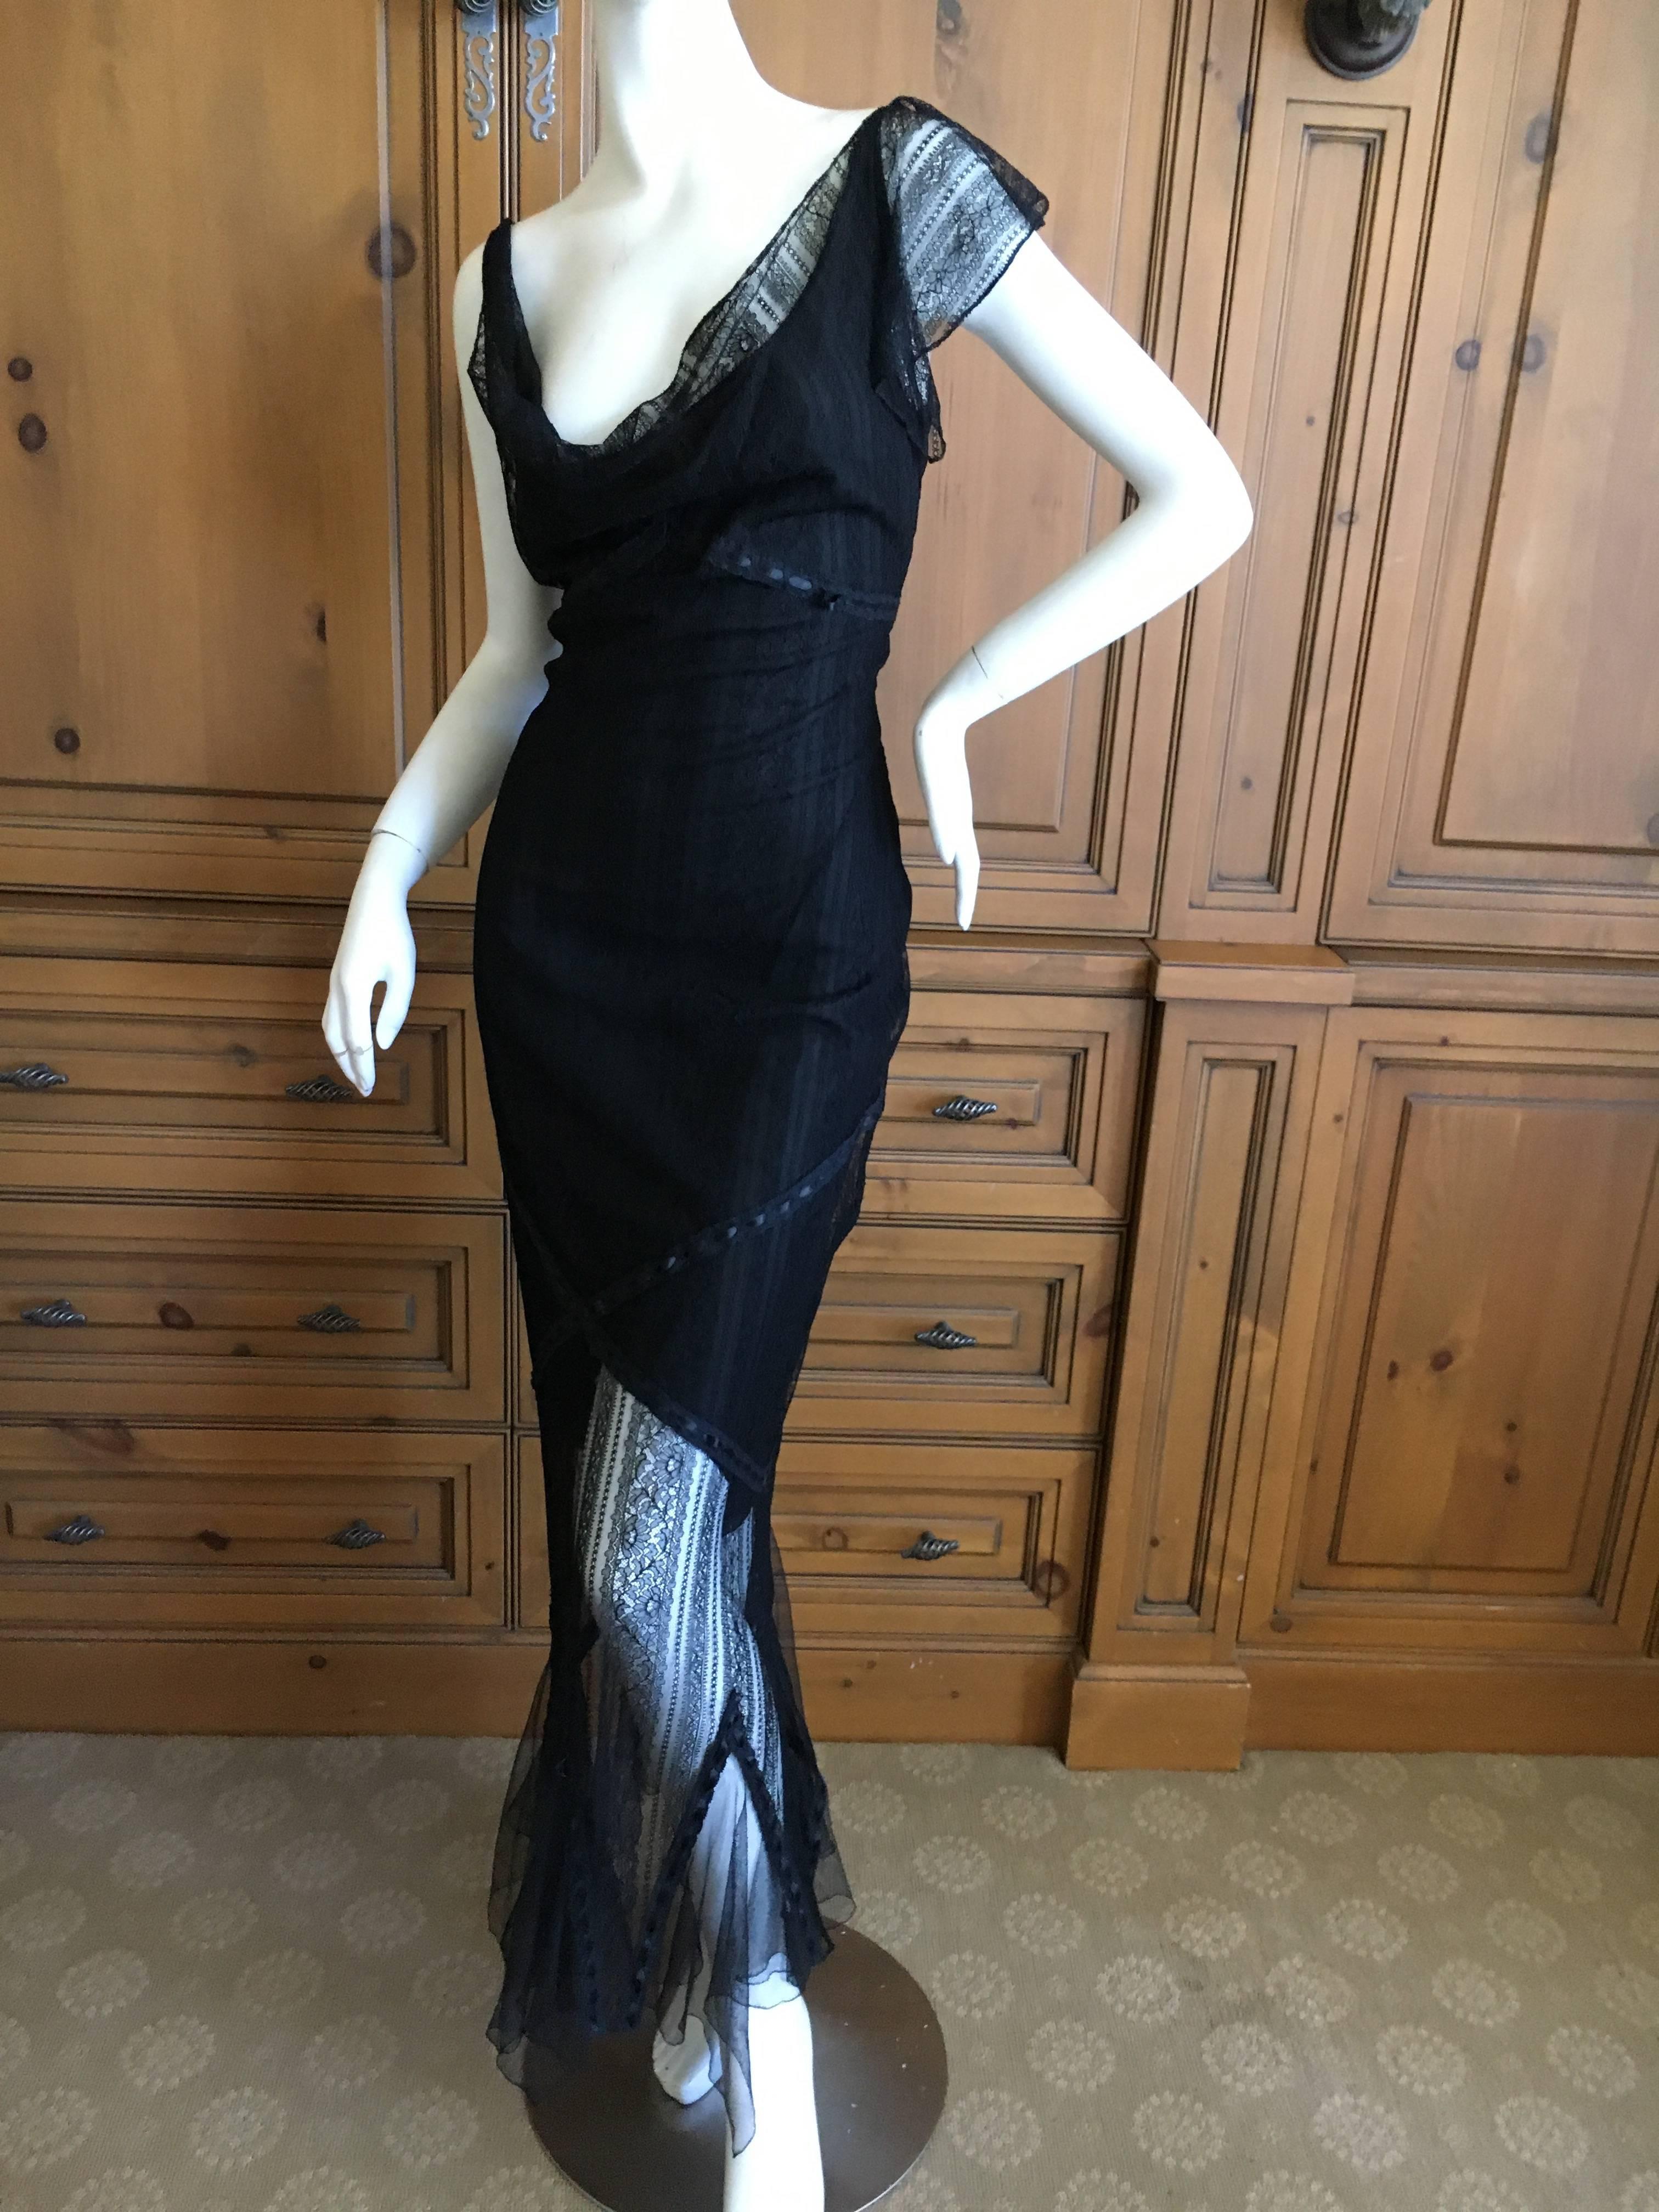 John Galliano Elegant Vintage Black Lace Evening Dress In Excellent Condition For Sale In Cloverdale, CA